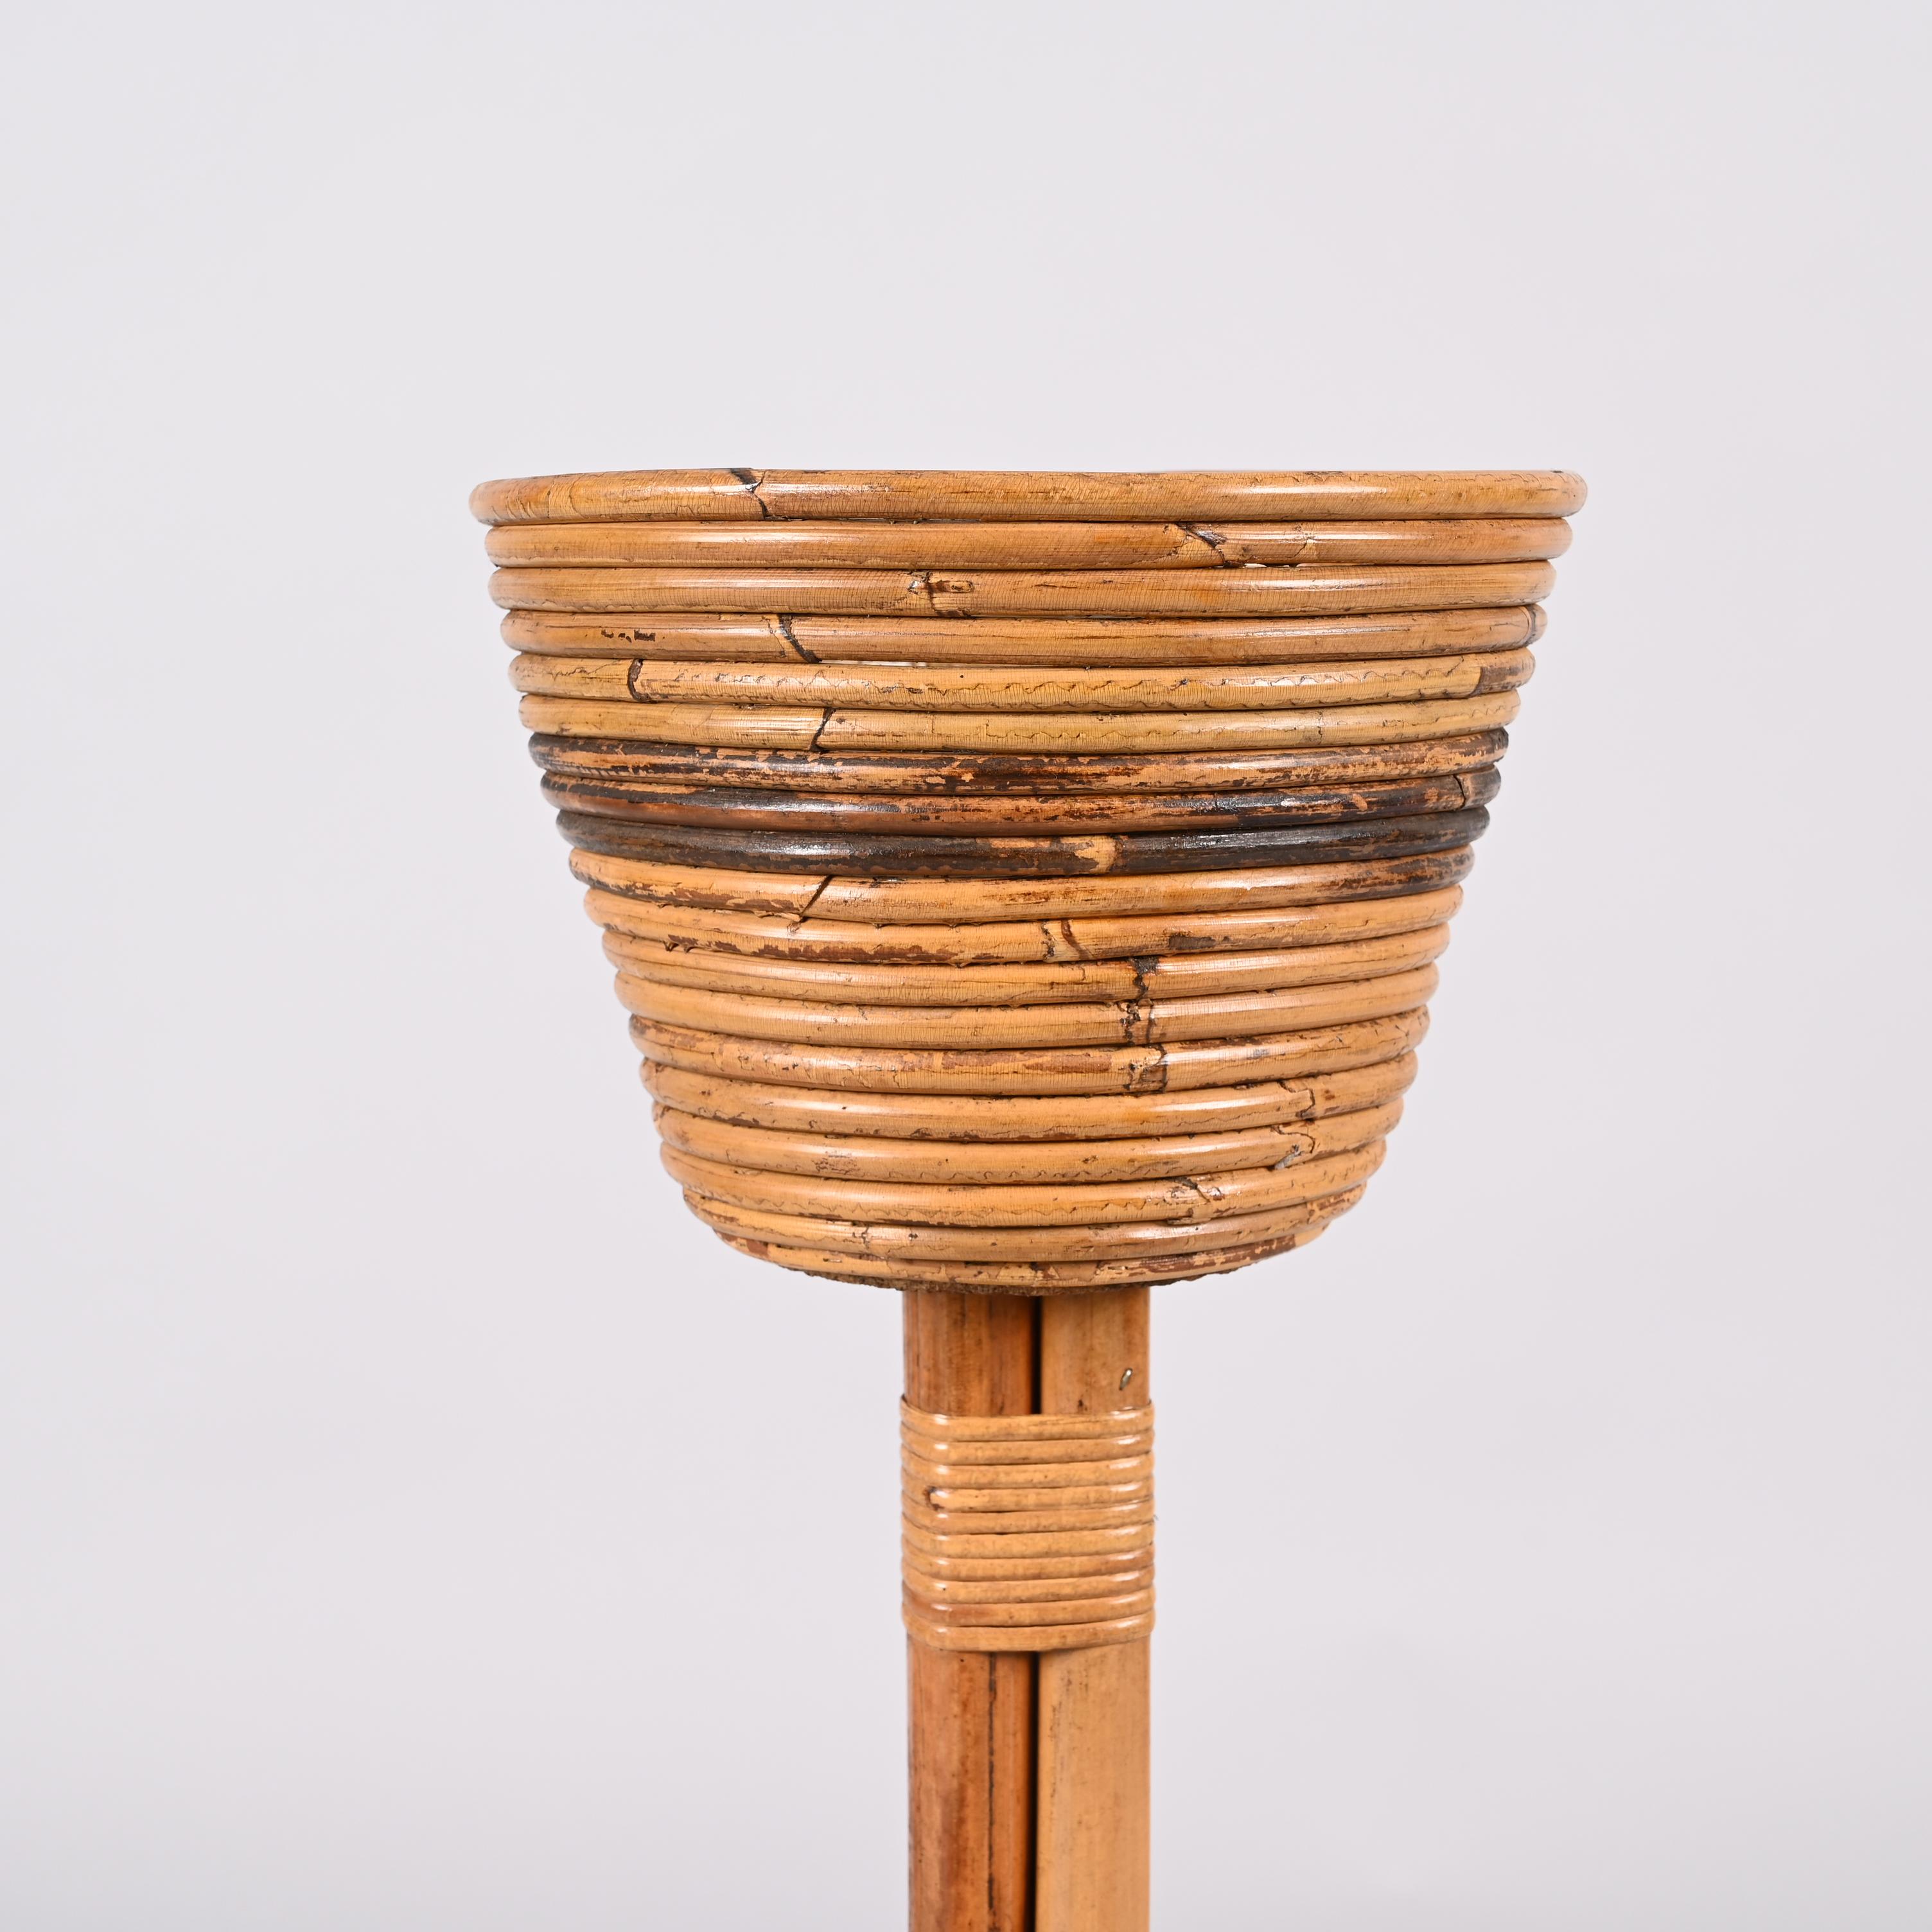 Midcentury Italian Bamboo Cane and Rattan Round Plant Holder, 1950s For Sale 2